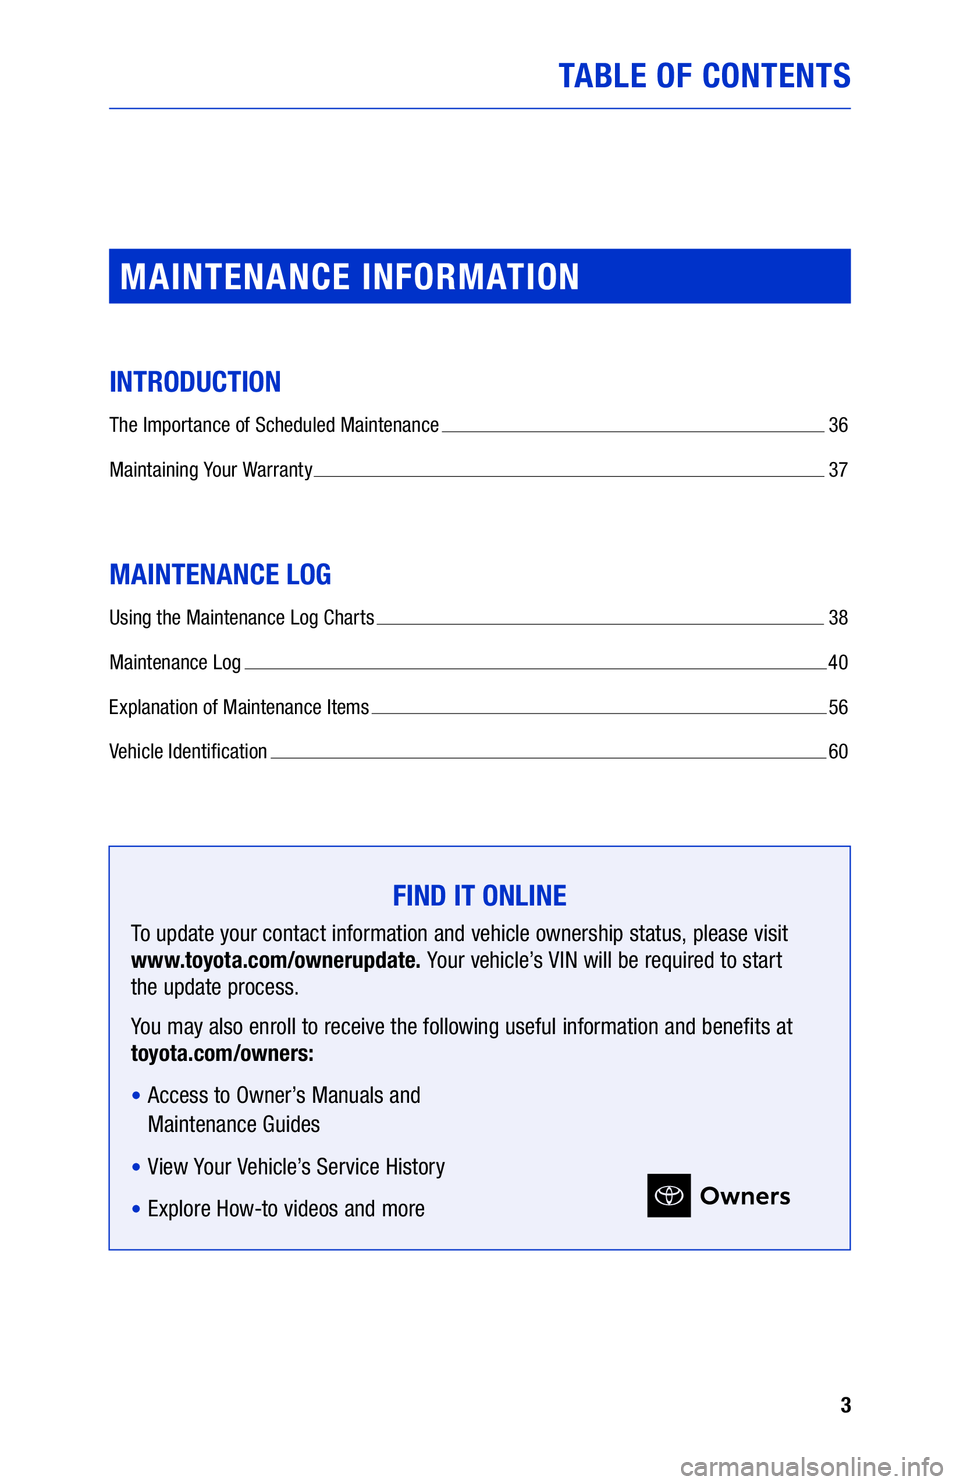 TOYOTA CAMRY HYBRID 2020  Warranties & Maintenance Guides (in English) 3
TABLE OF CONTENTS
MAINTENANCE INFORMATION
INTRODUCTION
The Importance of Scheduled Maintenance  36
M
aintaining Your Warranty 
 37
MAINTENANCE LOG
Using the Maintenance Log Charts  38
M
aintenance L